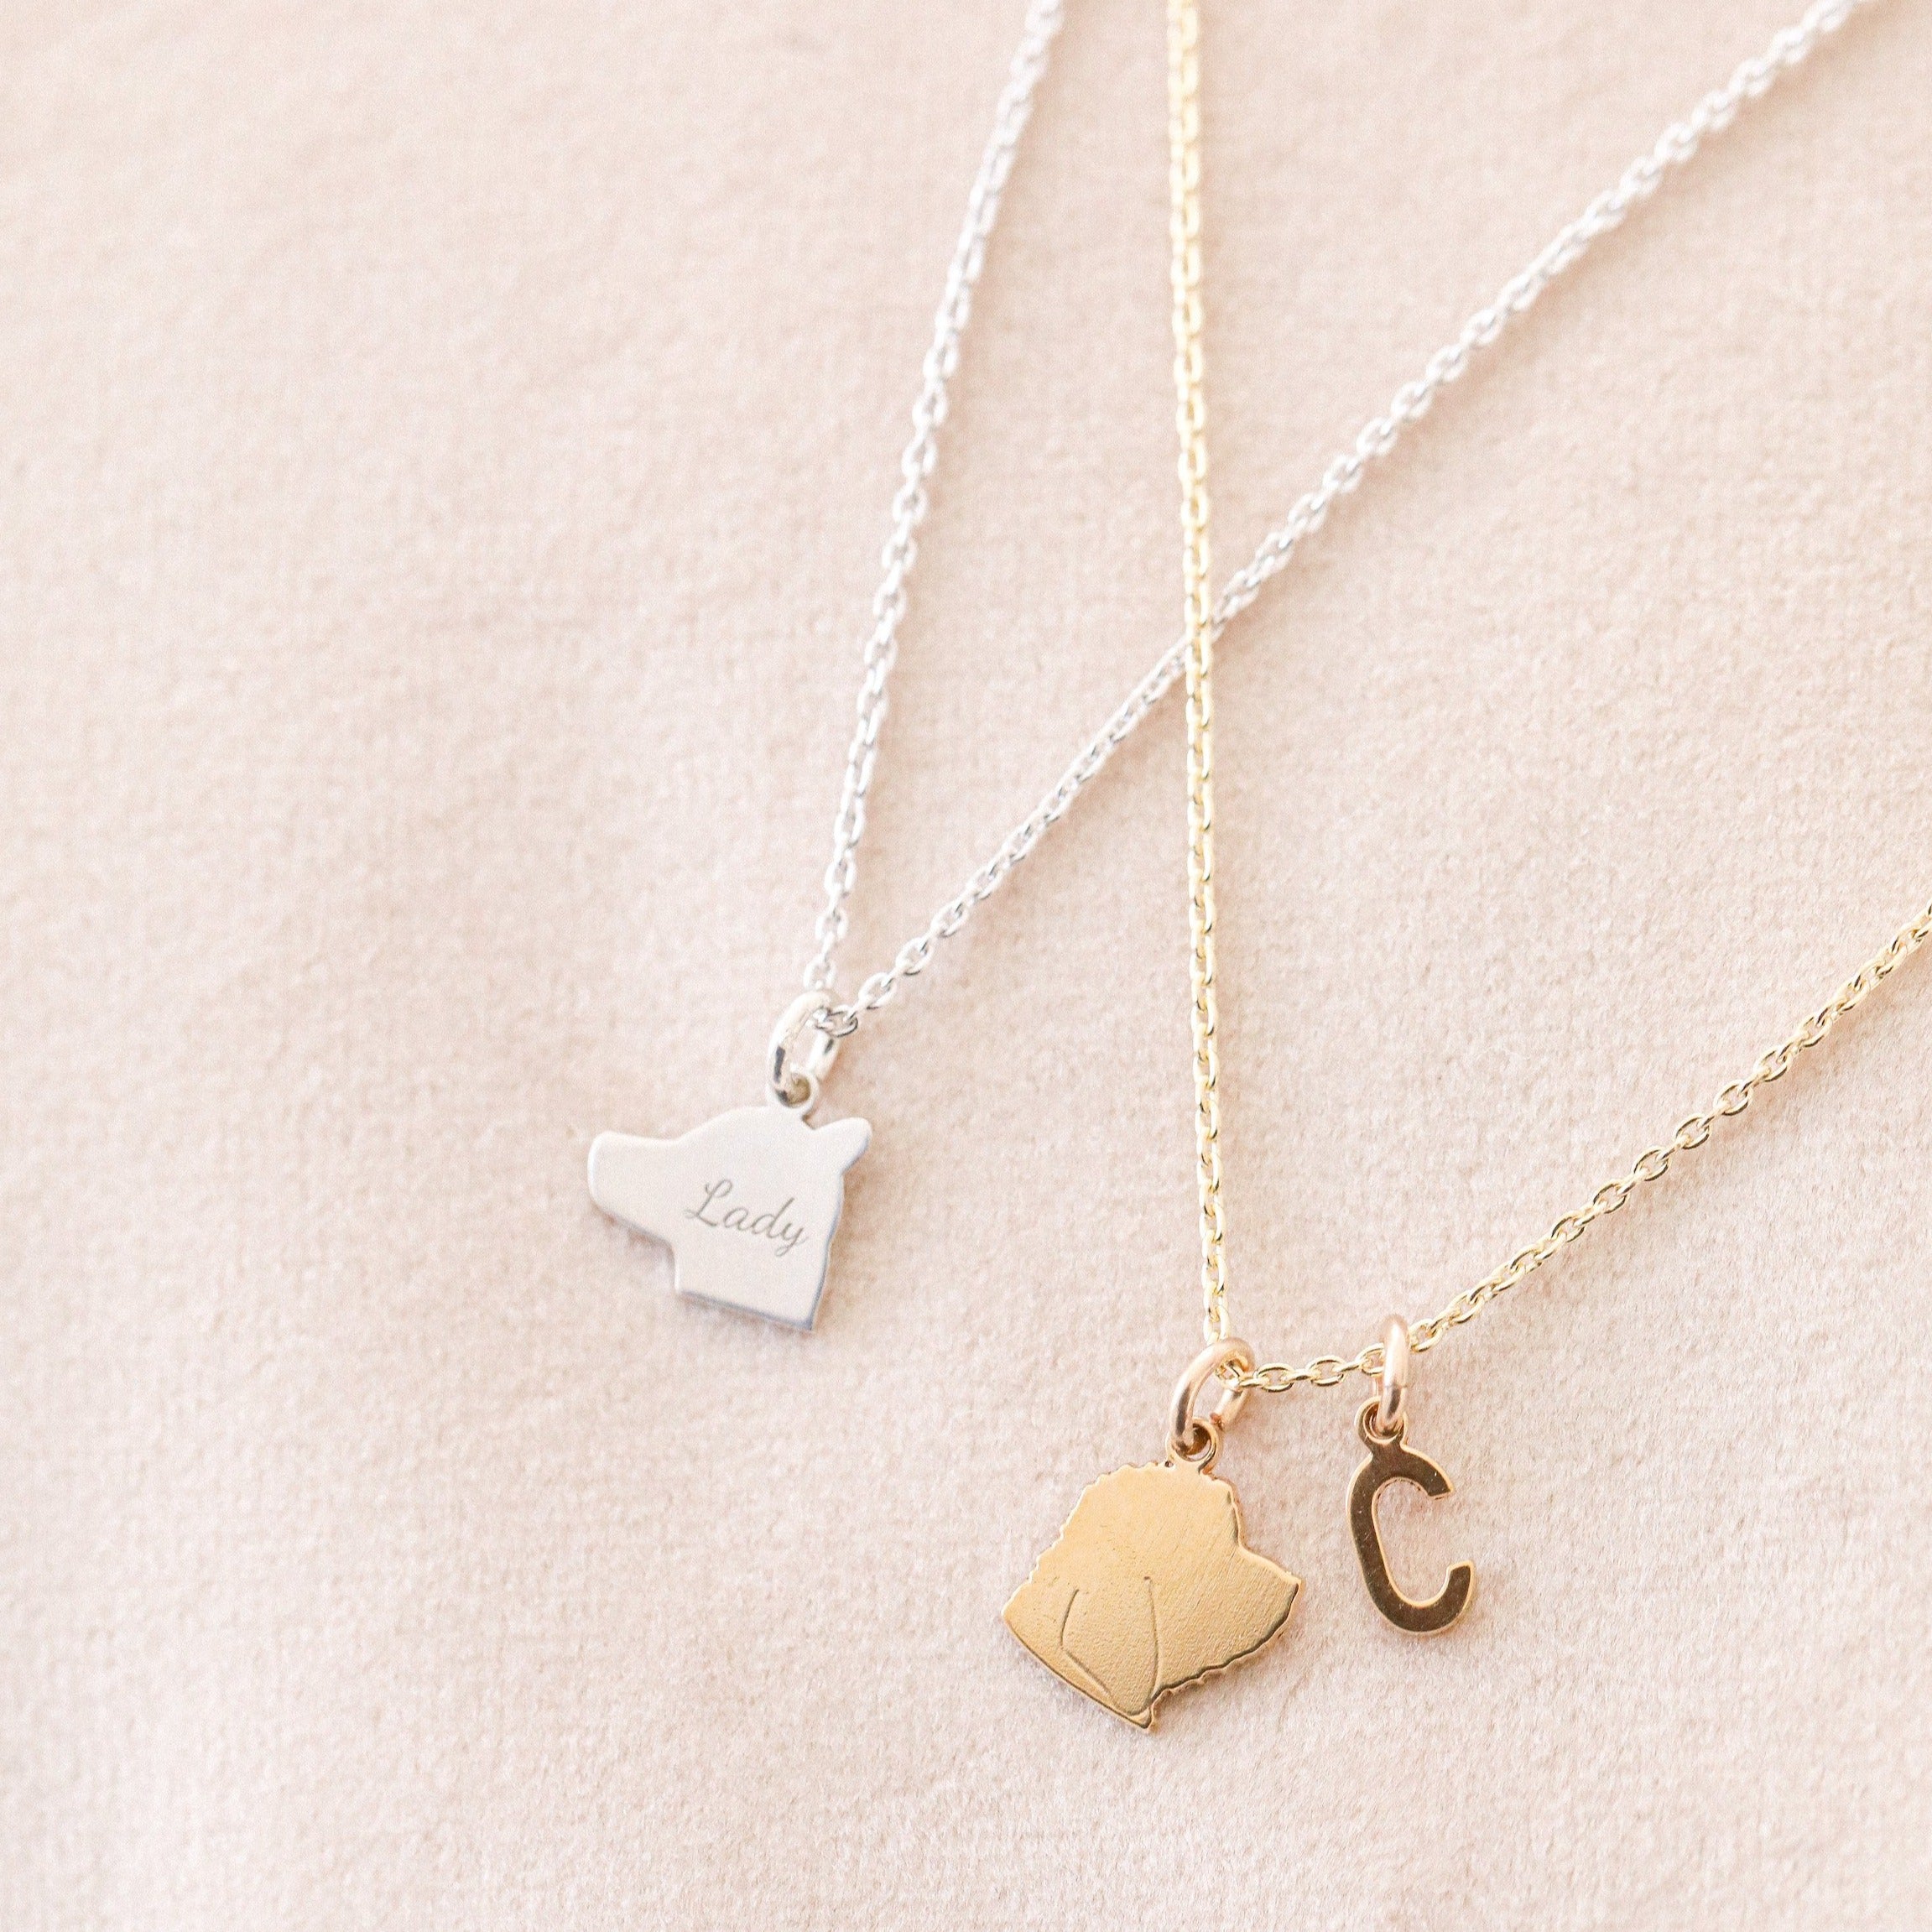 Stock Silhouette Charm Necklace - Tiny